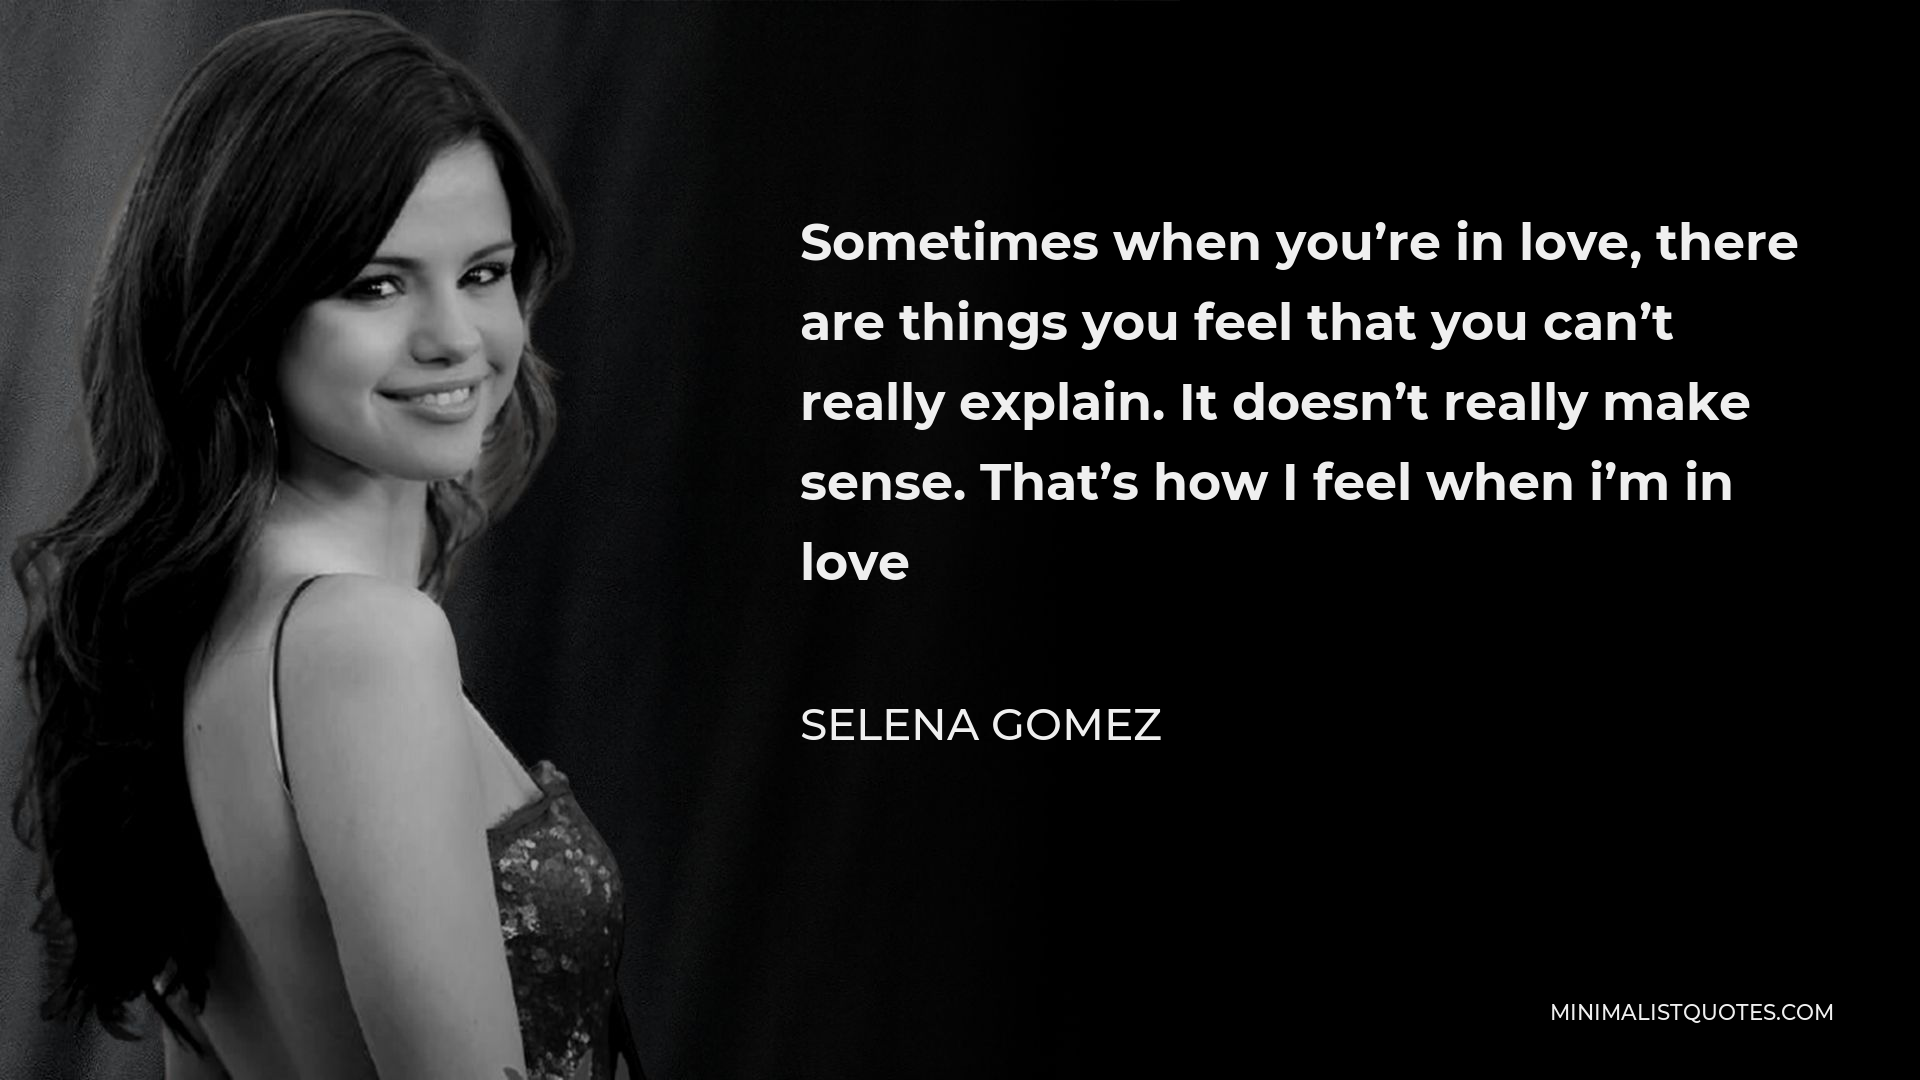 Selena Gomez Quote - Sometimes when you’re in love, there are things you feel that you can’t really explain. It doesn’t really make sense. That’s how I feel when i’m in love